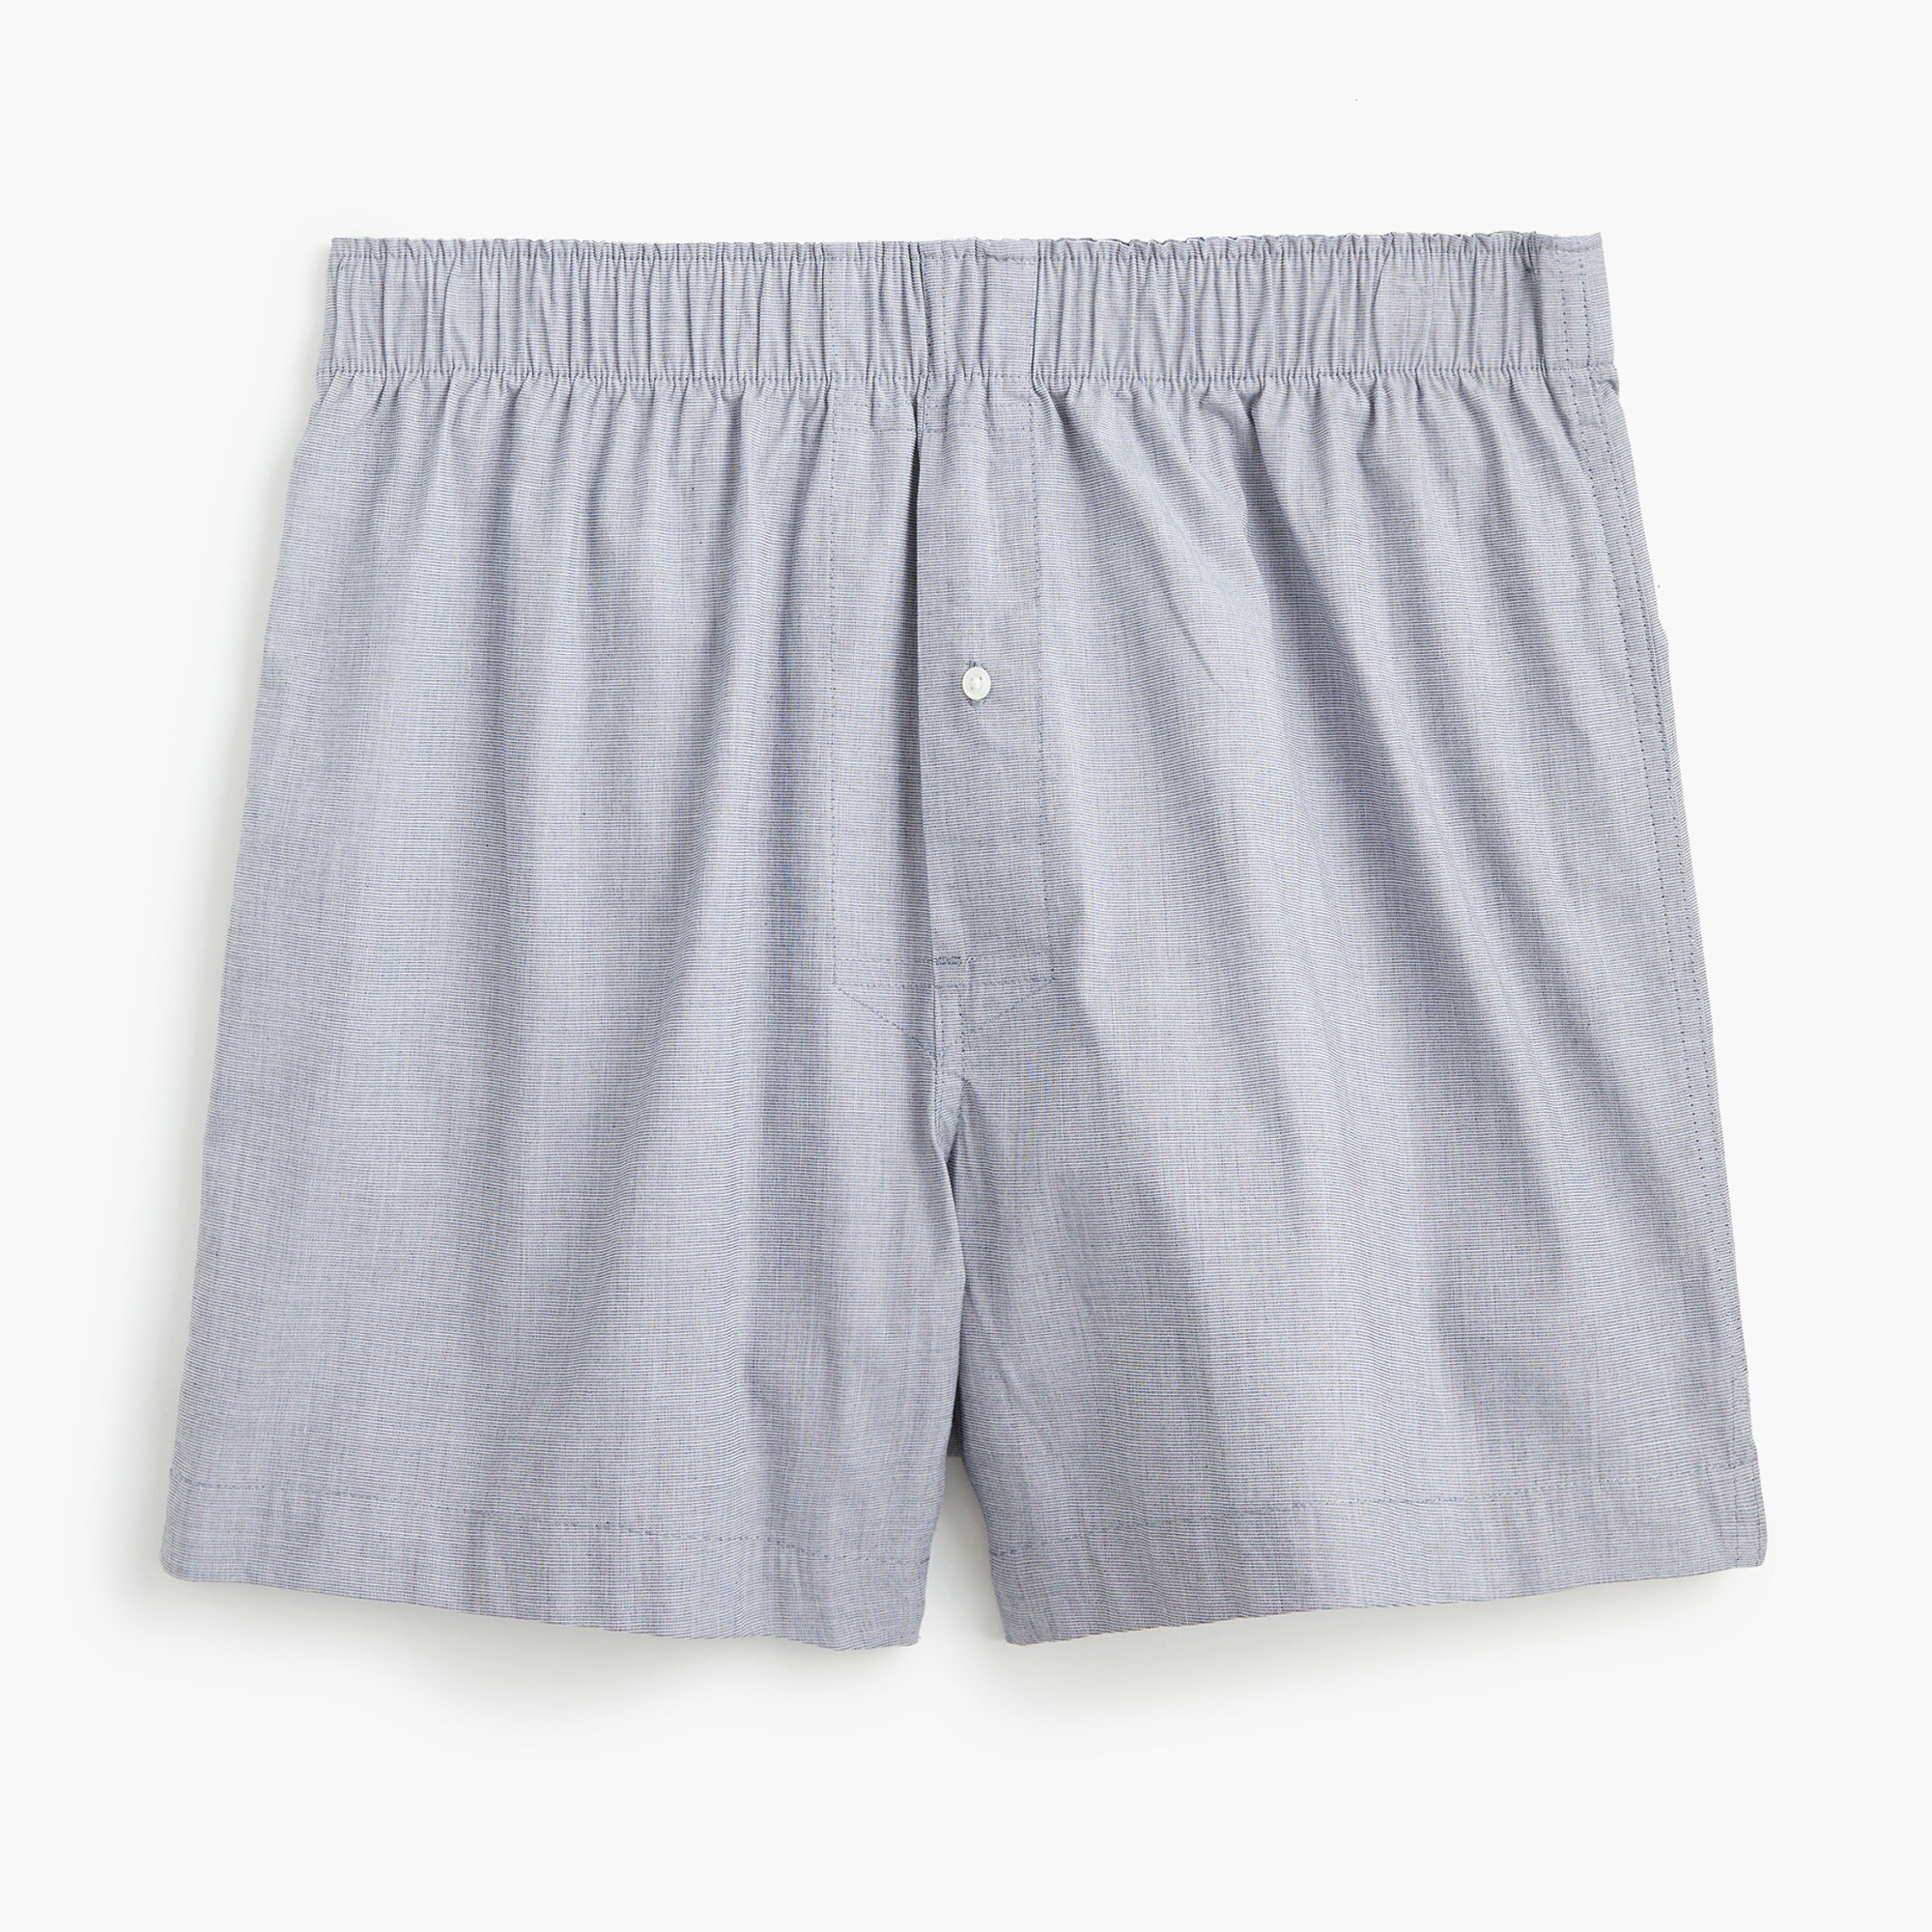 J.Crew: Stretch Solid Boxers For Men